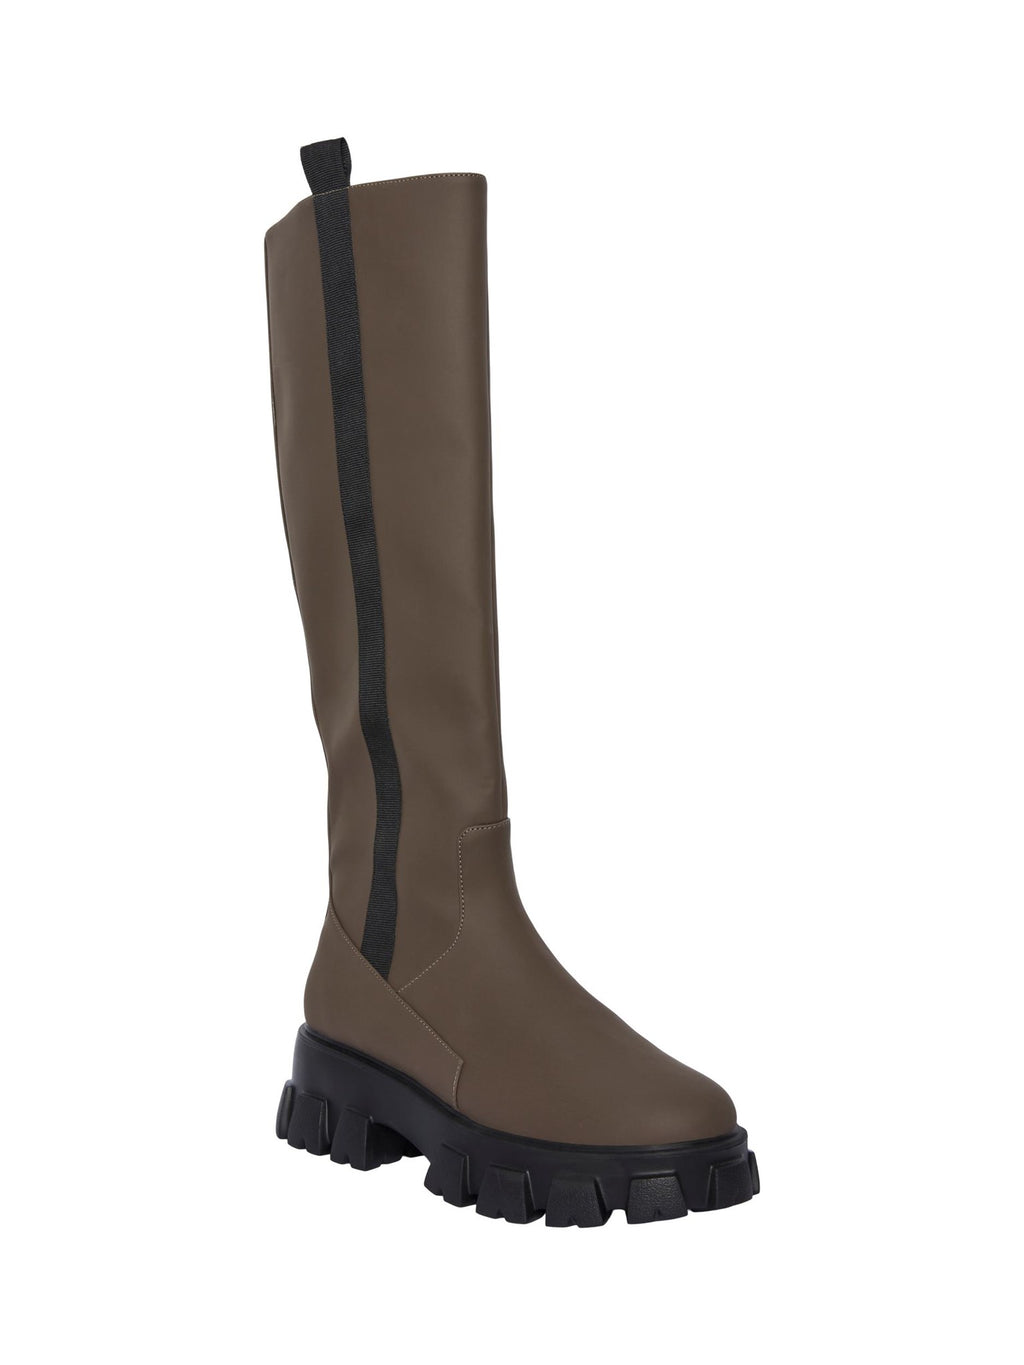 Adrianna Knee High Boots - Fossil